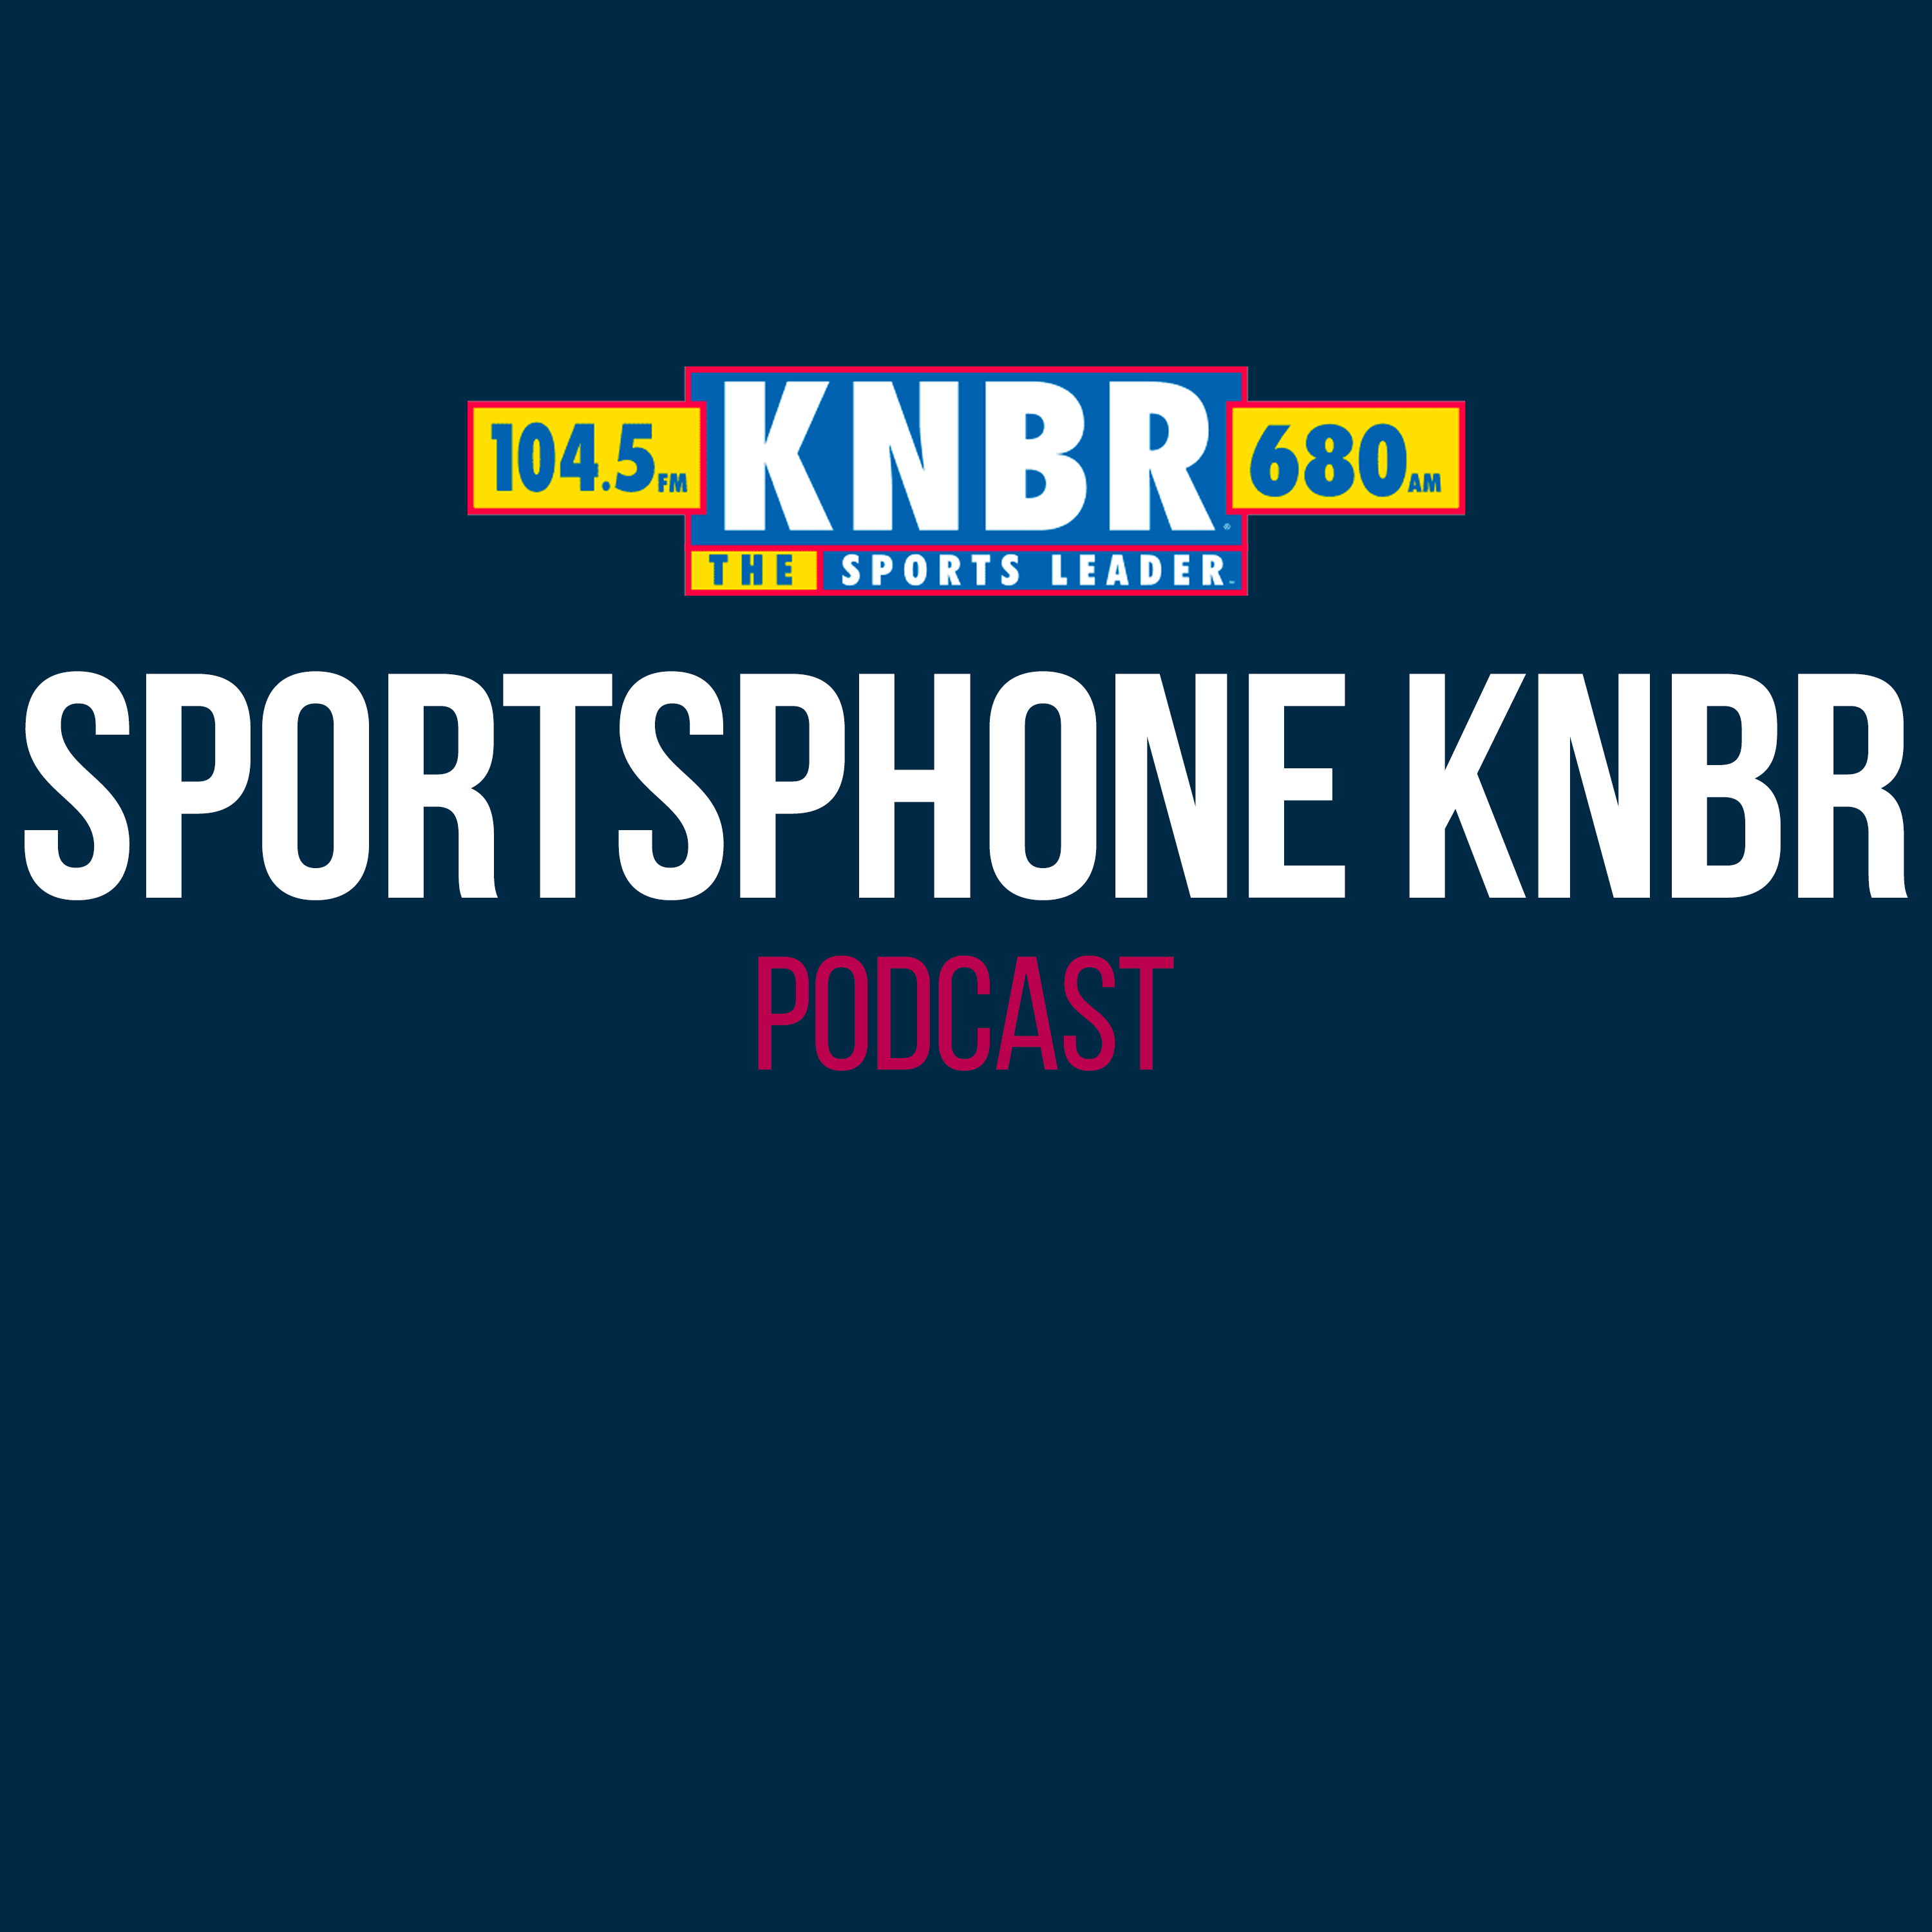 3-29 Bob Scanlan joins Bill Laskey on SportsPhone KNBR to reflect on the experience of beginning the season in a foreign country and the MLB's quest to expand internationally